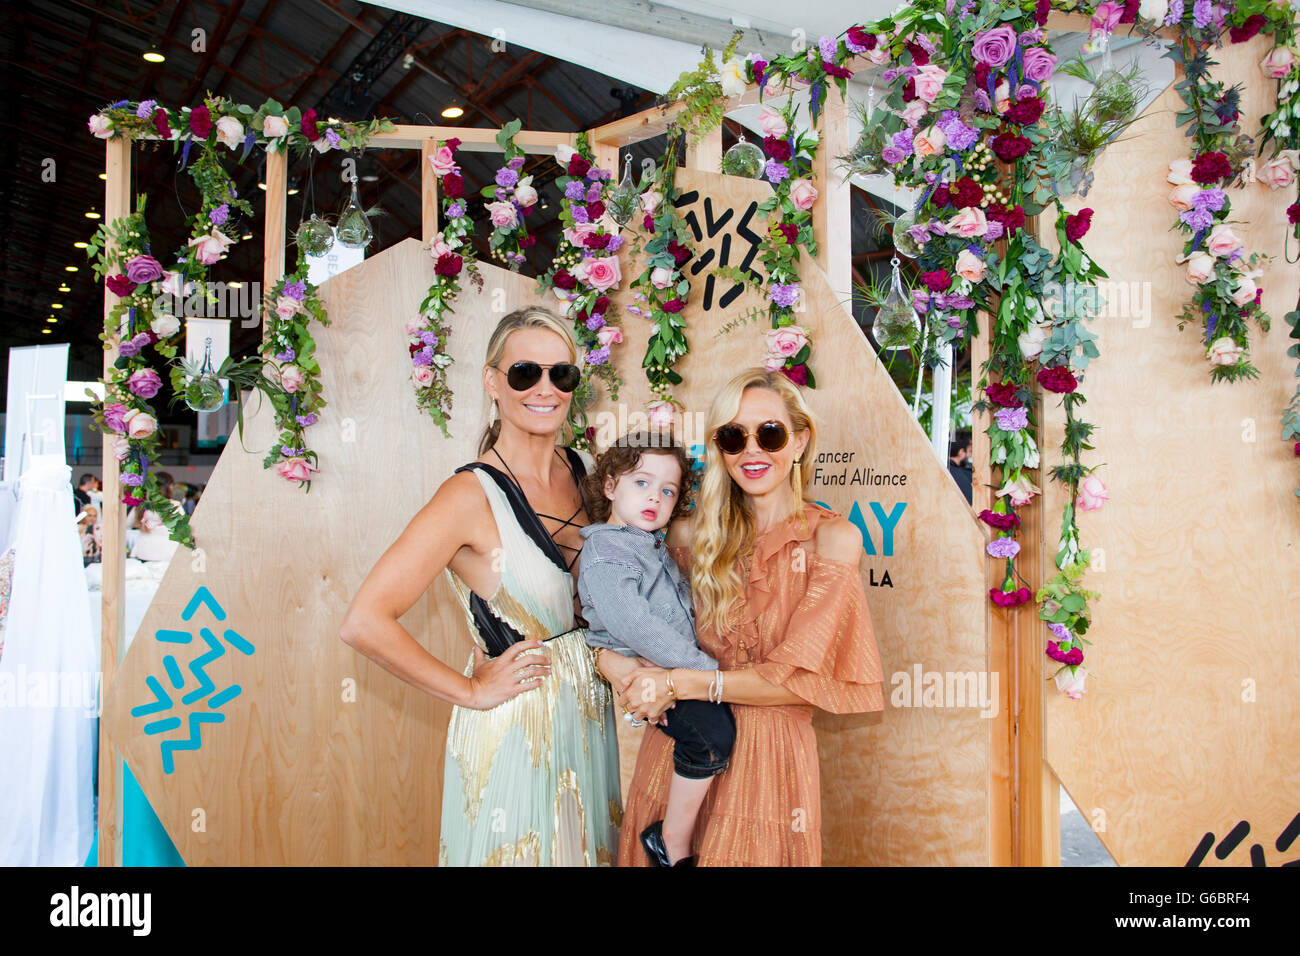 SANTA MONICA, CA - JUNE 11: Molly Sims and Rachel Zoe attend Ovarian Cancer Research Fund Alliance's 3rd Annual Super Saturday Stock Photo